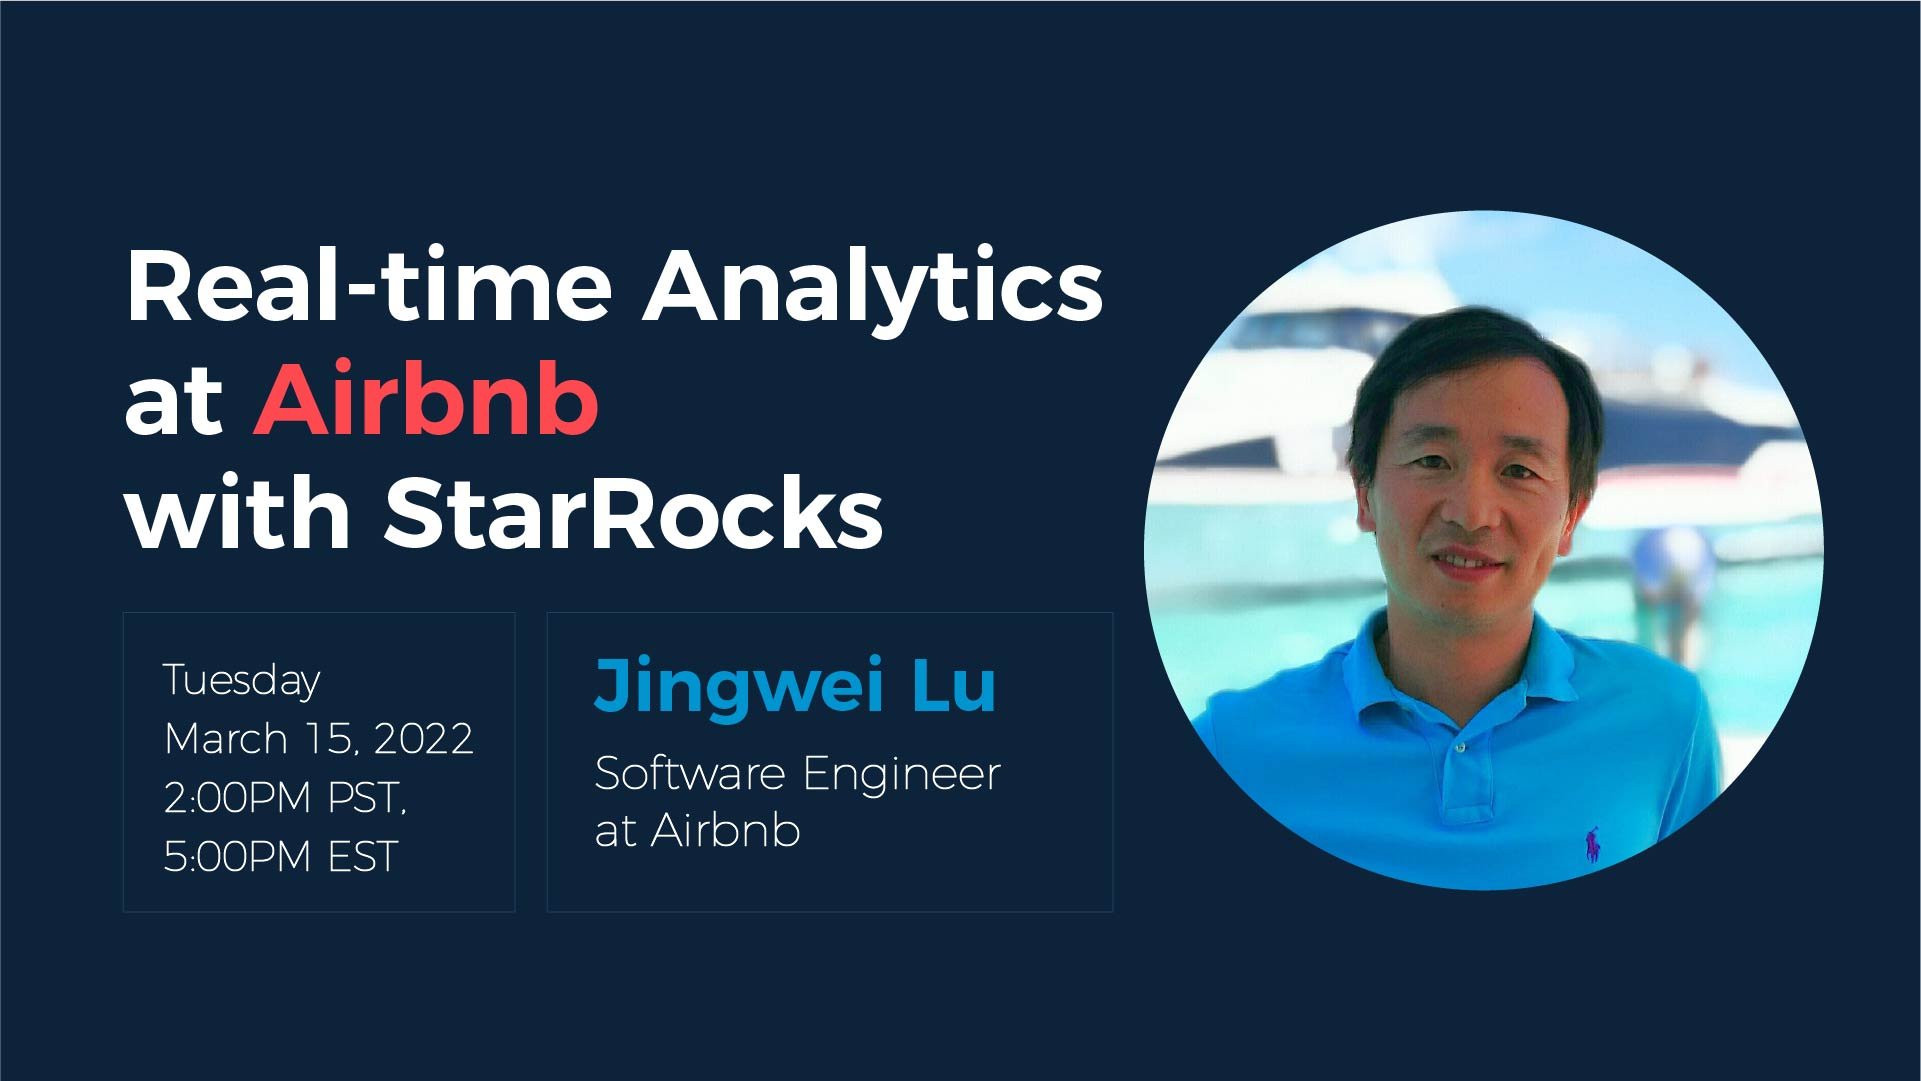 Real-time Analytics at Airbnb with StarRocks